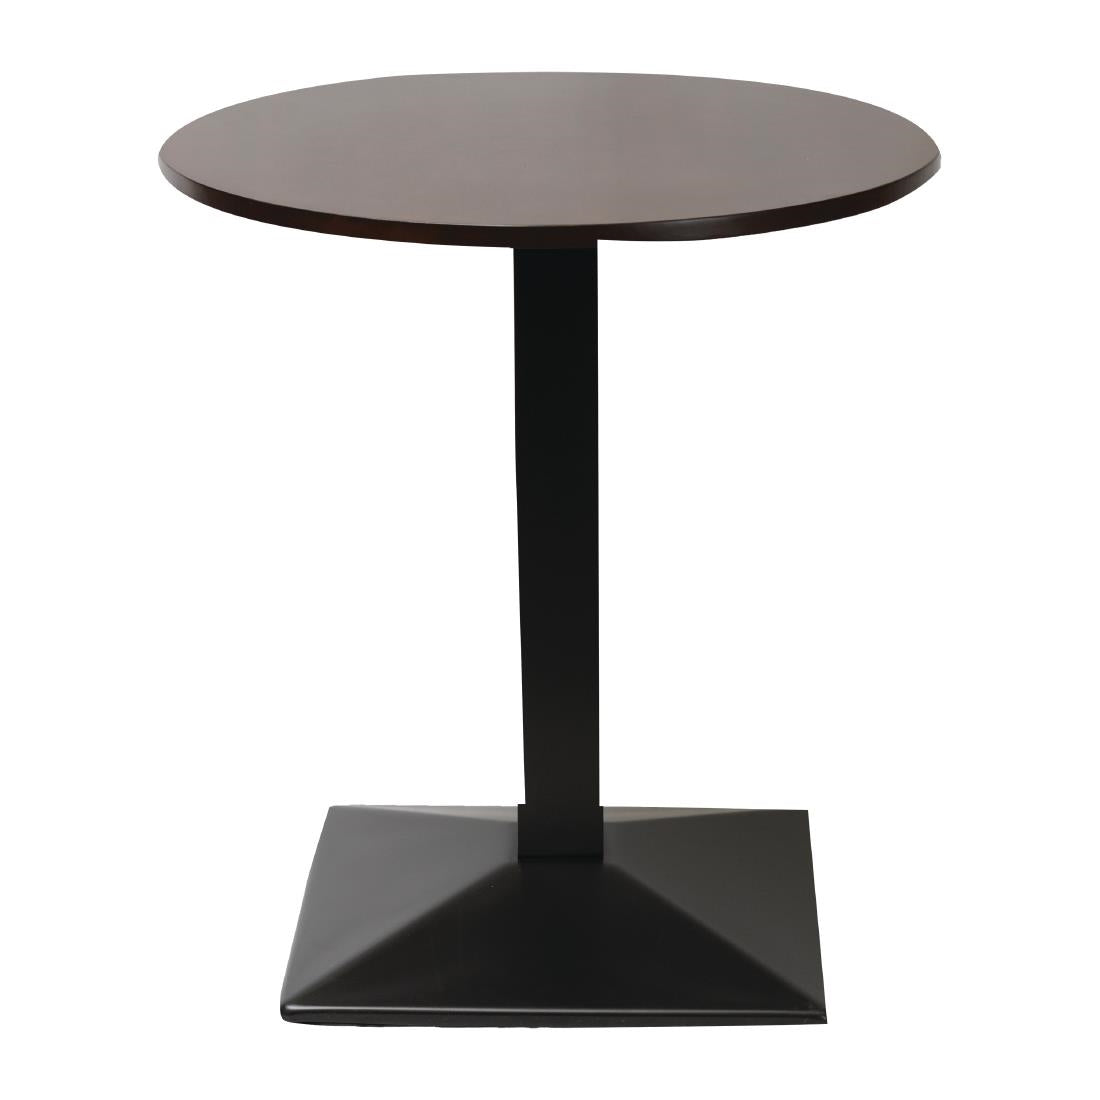 FT499 Turin Metal Base Pedestal Round Table with Dark Wood Top 700mm JD Catering Equipment Solutions Ltd